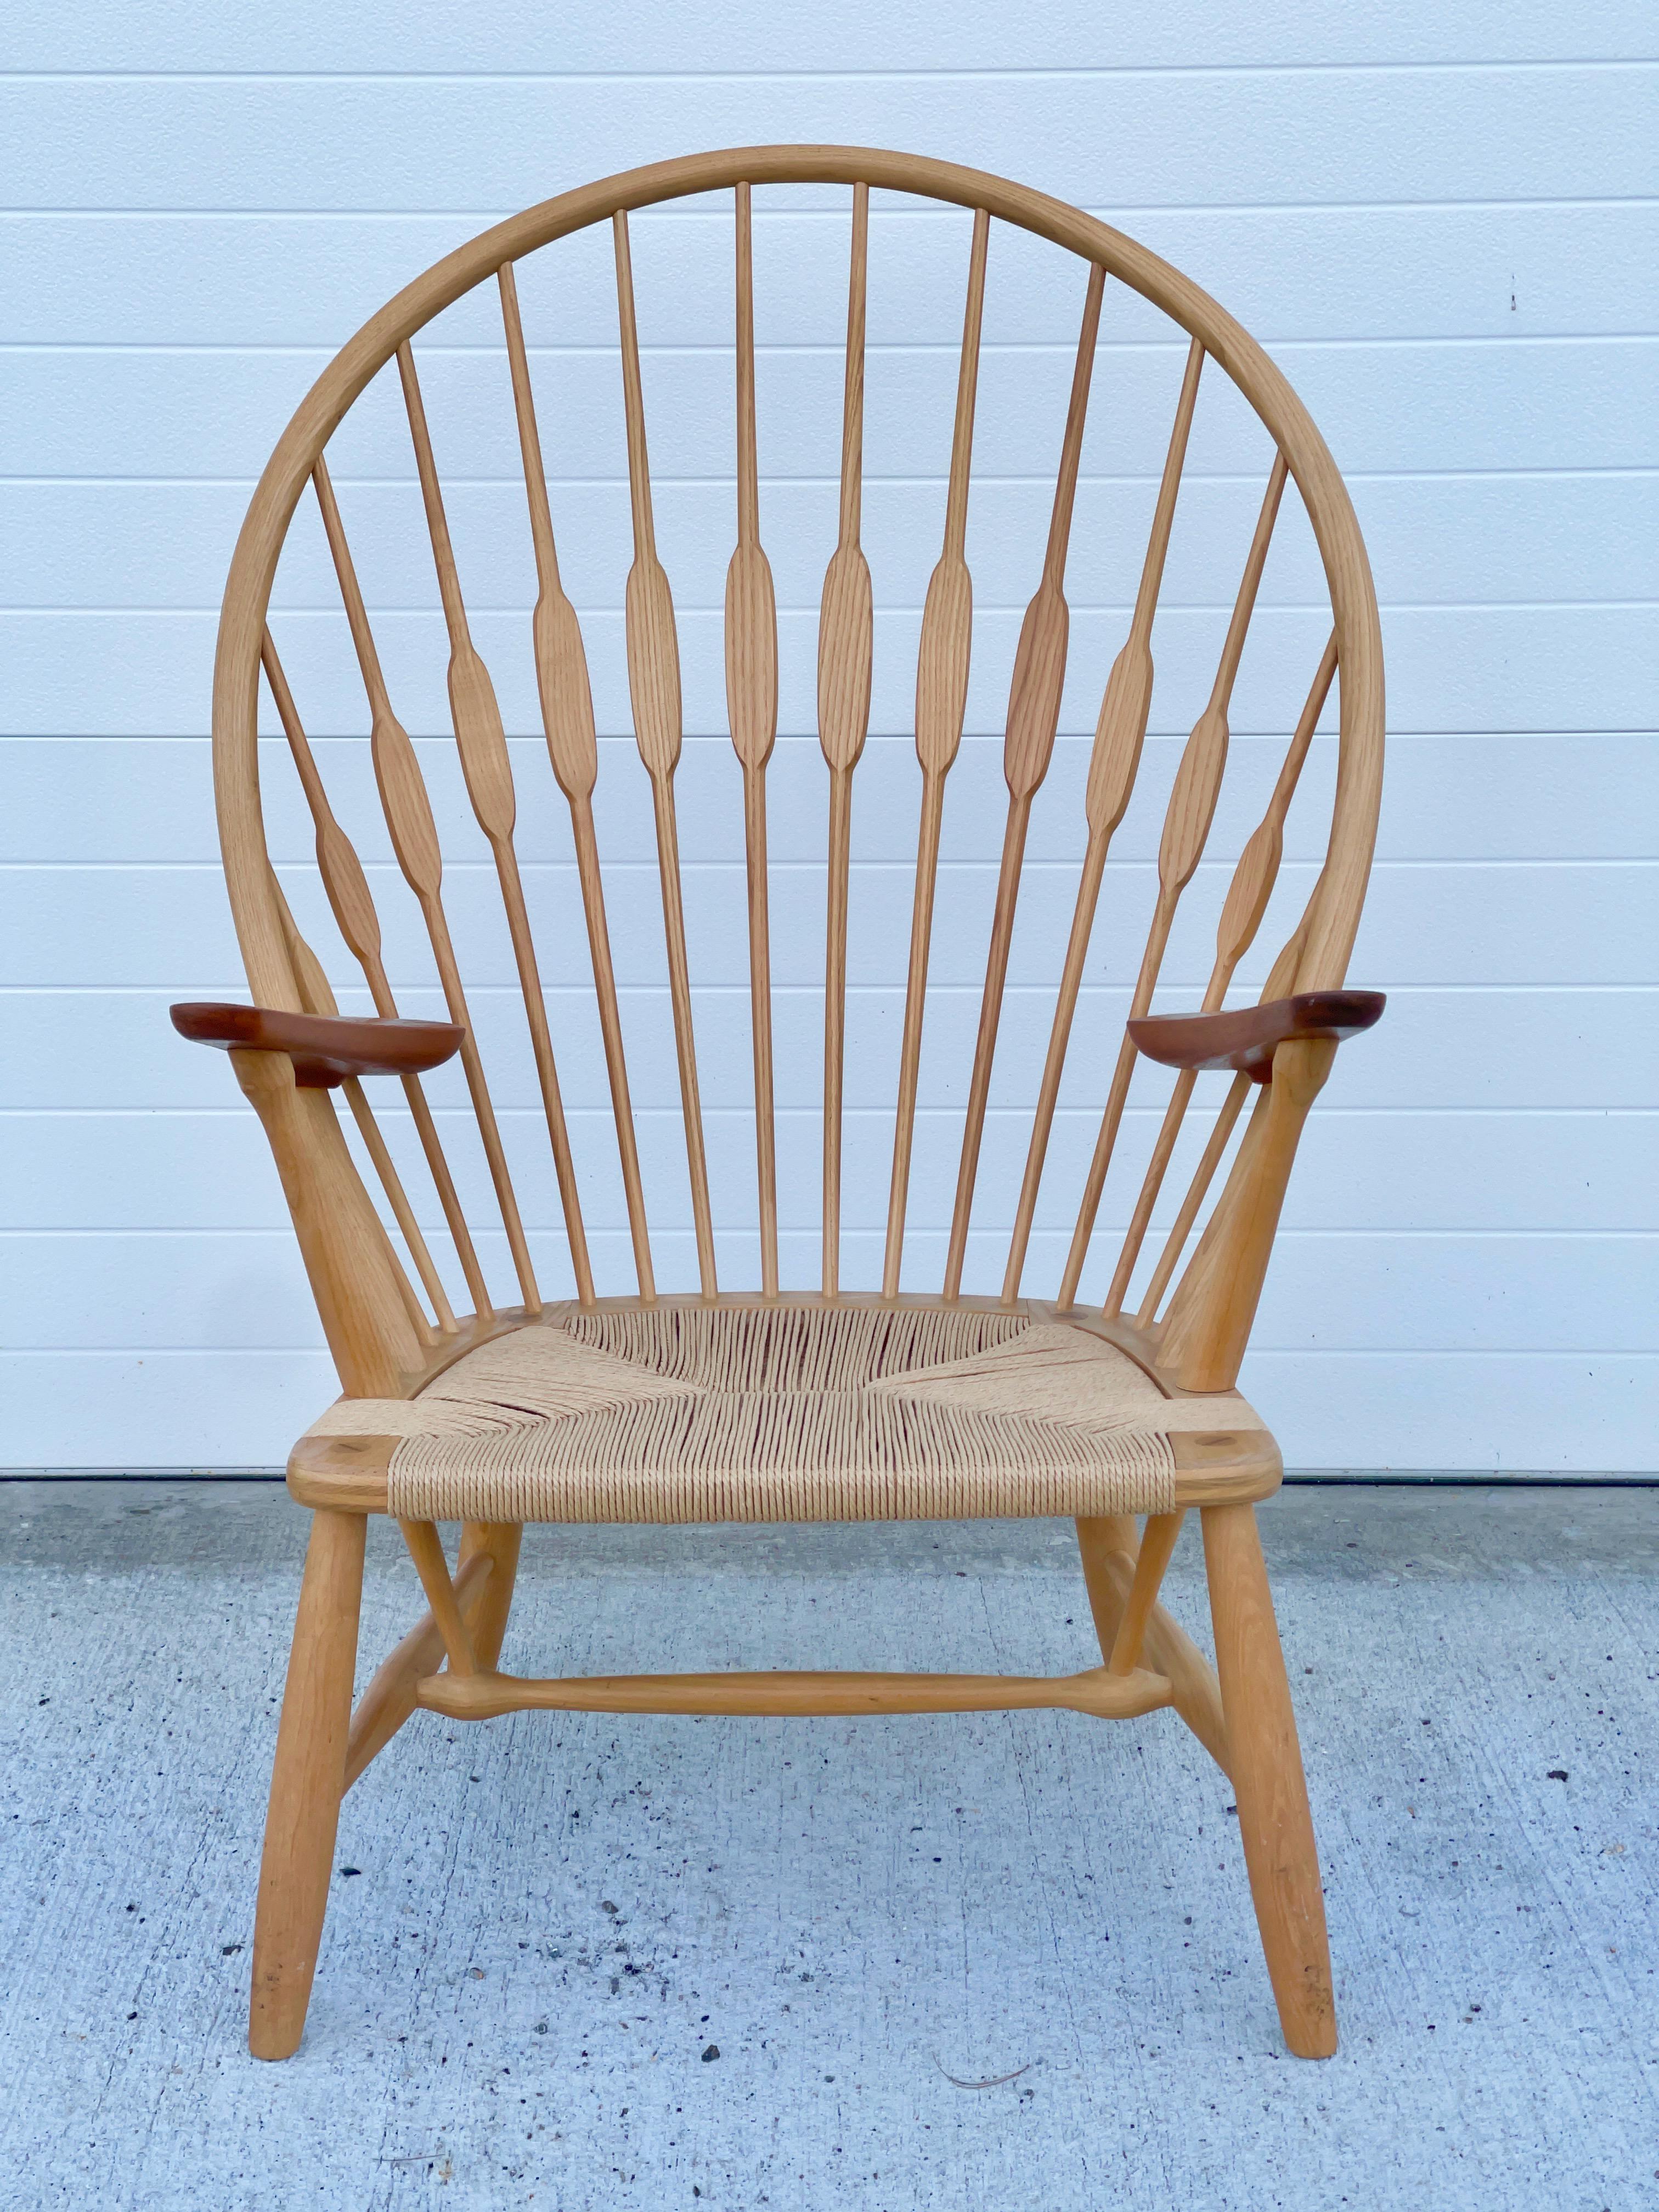 Hans J. Wegner model JH-550 Peacock chair for Johannes Hansen, designed in 1947, produced circa 1960, Denmark. Stamped by maker.
Outstanding original condition with no splits or repairs.
Corded seat newly replaced.
Model presented at The Copenhagen